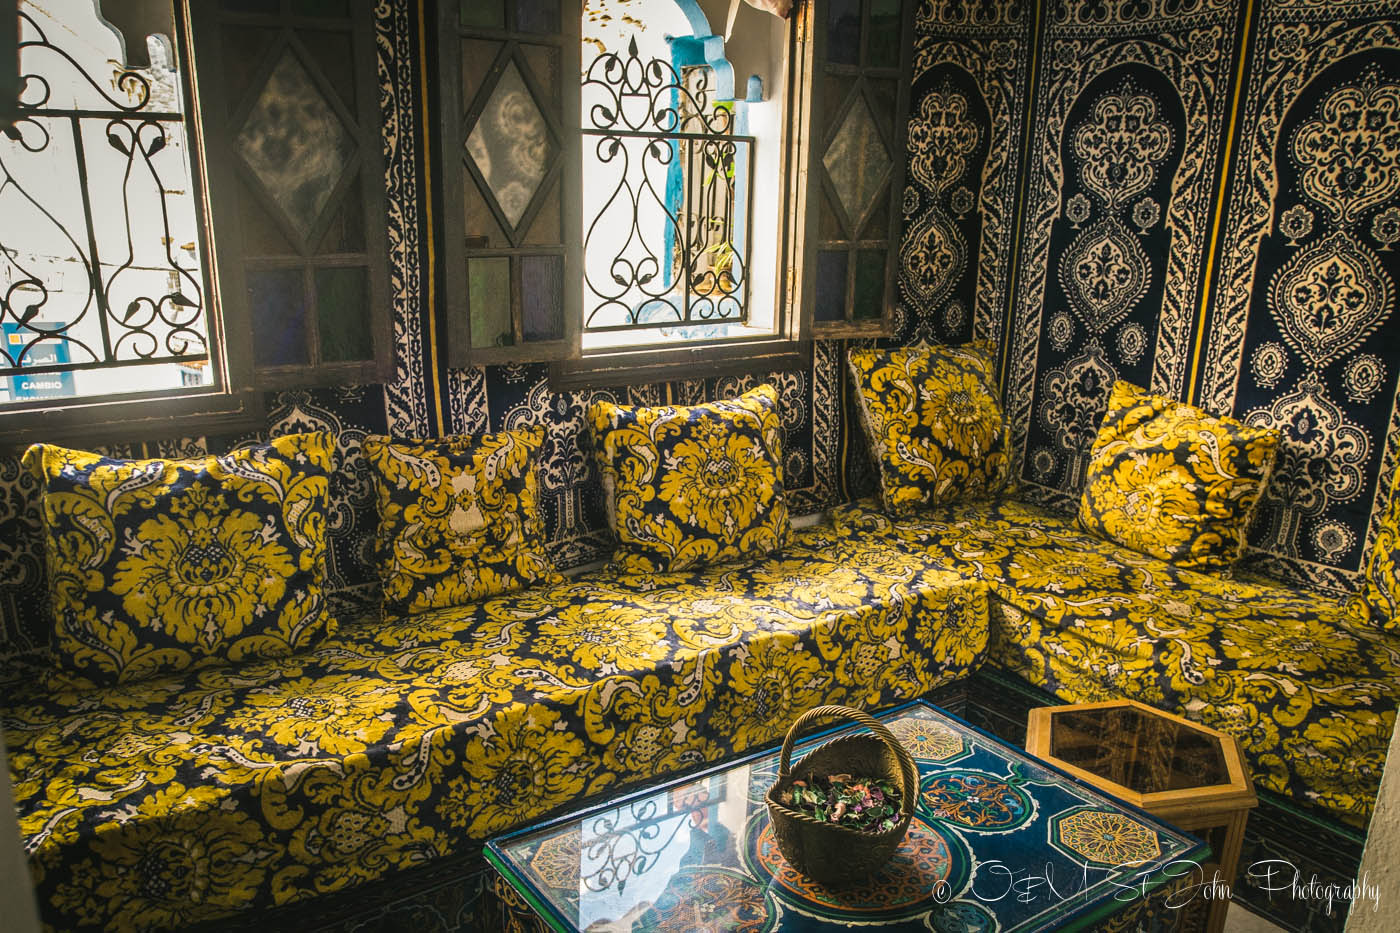 Traditional Moroccan design inside the Maison Hotel, Chefchaouen, Morocco